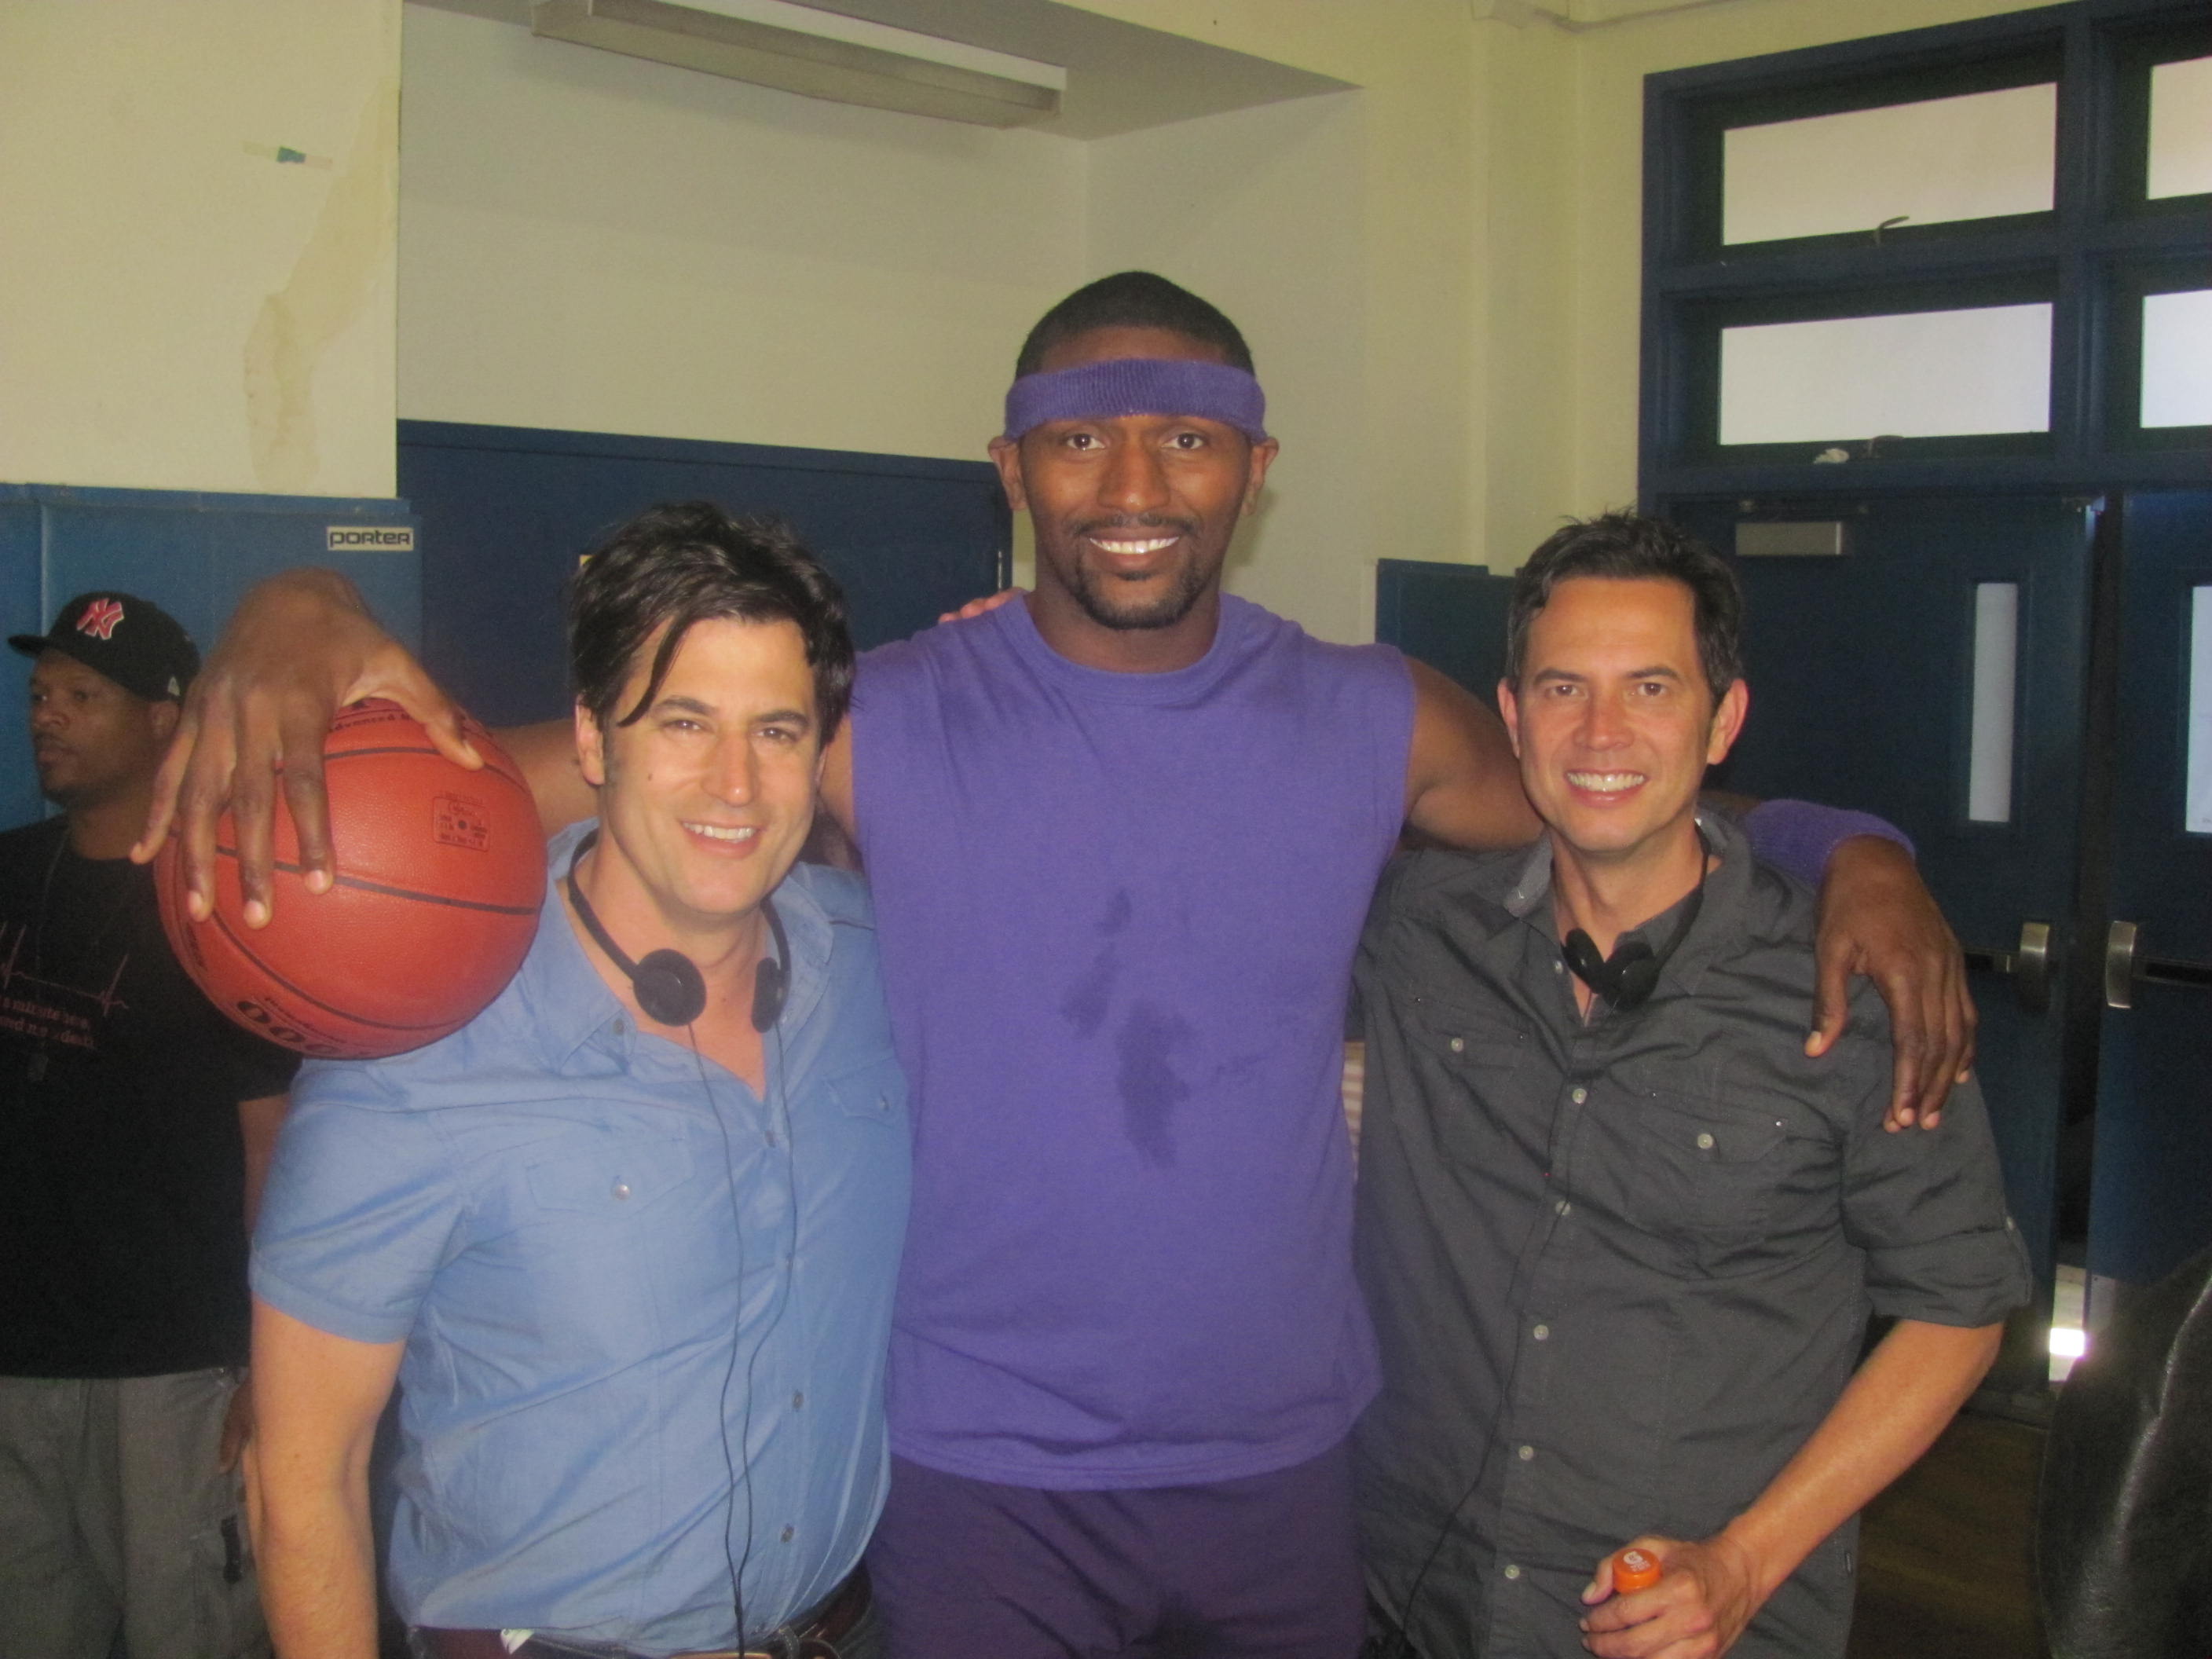 Writers David A. Newman and Keith Merryman on the set of Think Like A Man with Metta World Peace